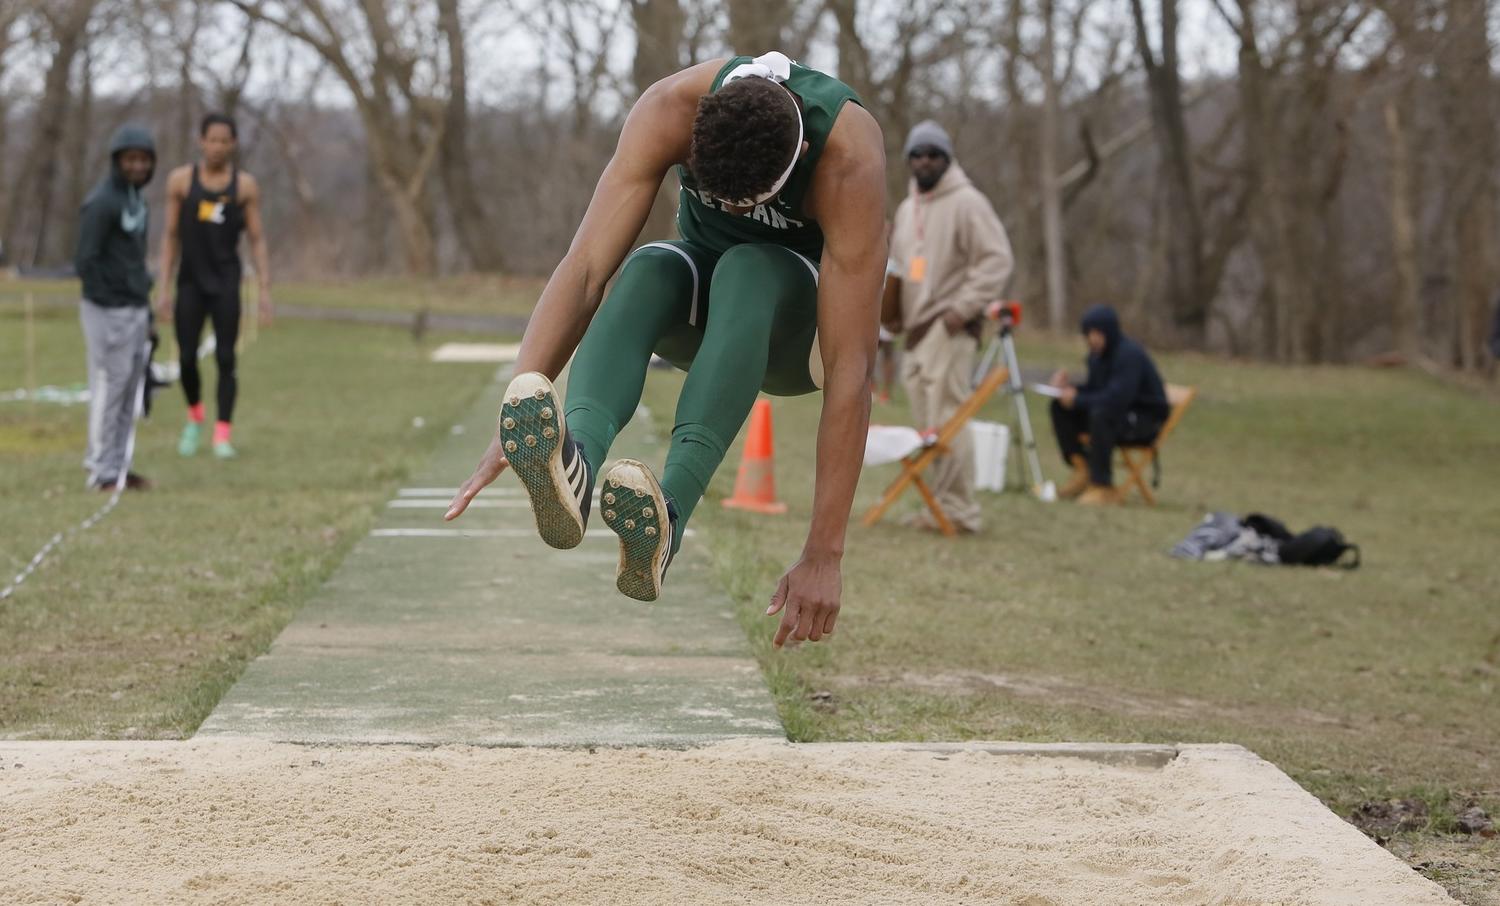 Sallah-Mohammed named USTFCCA All-Region in two events